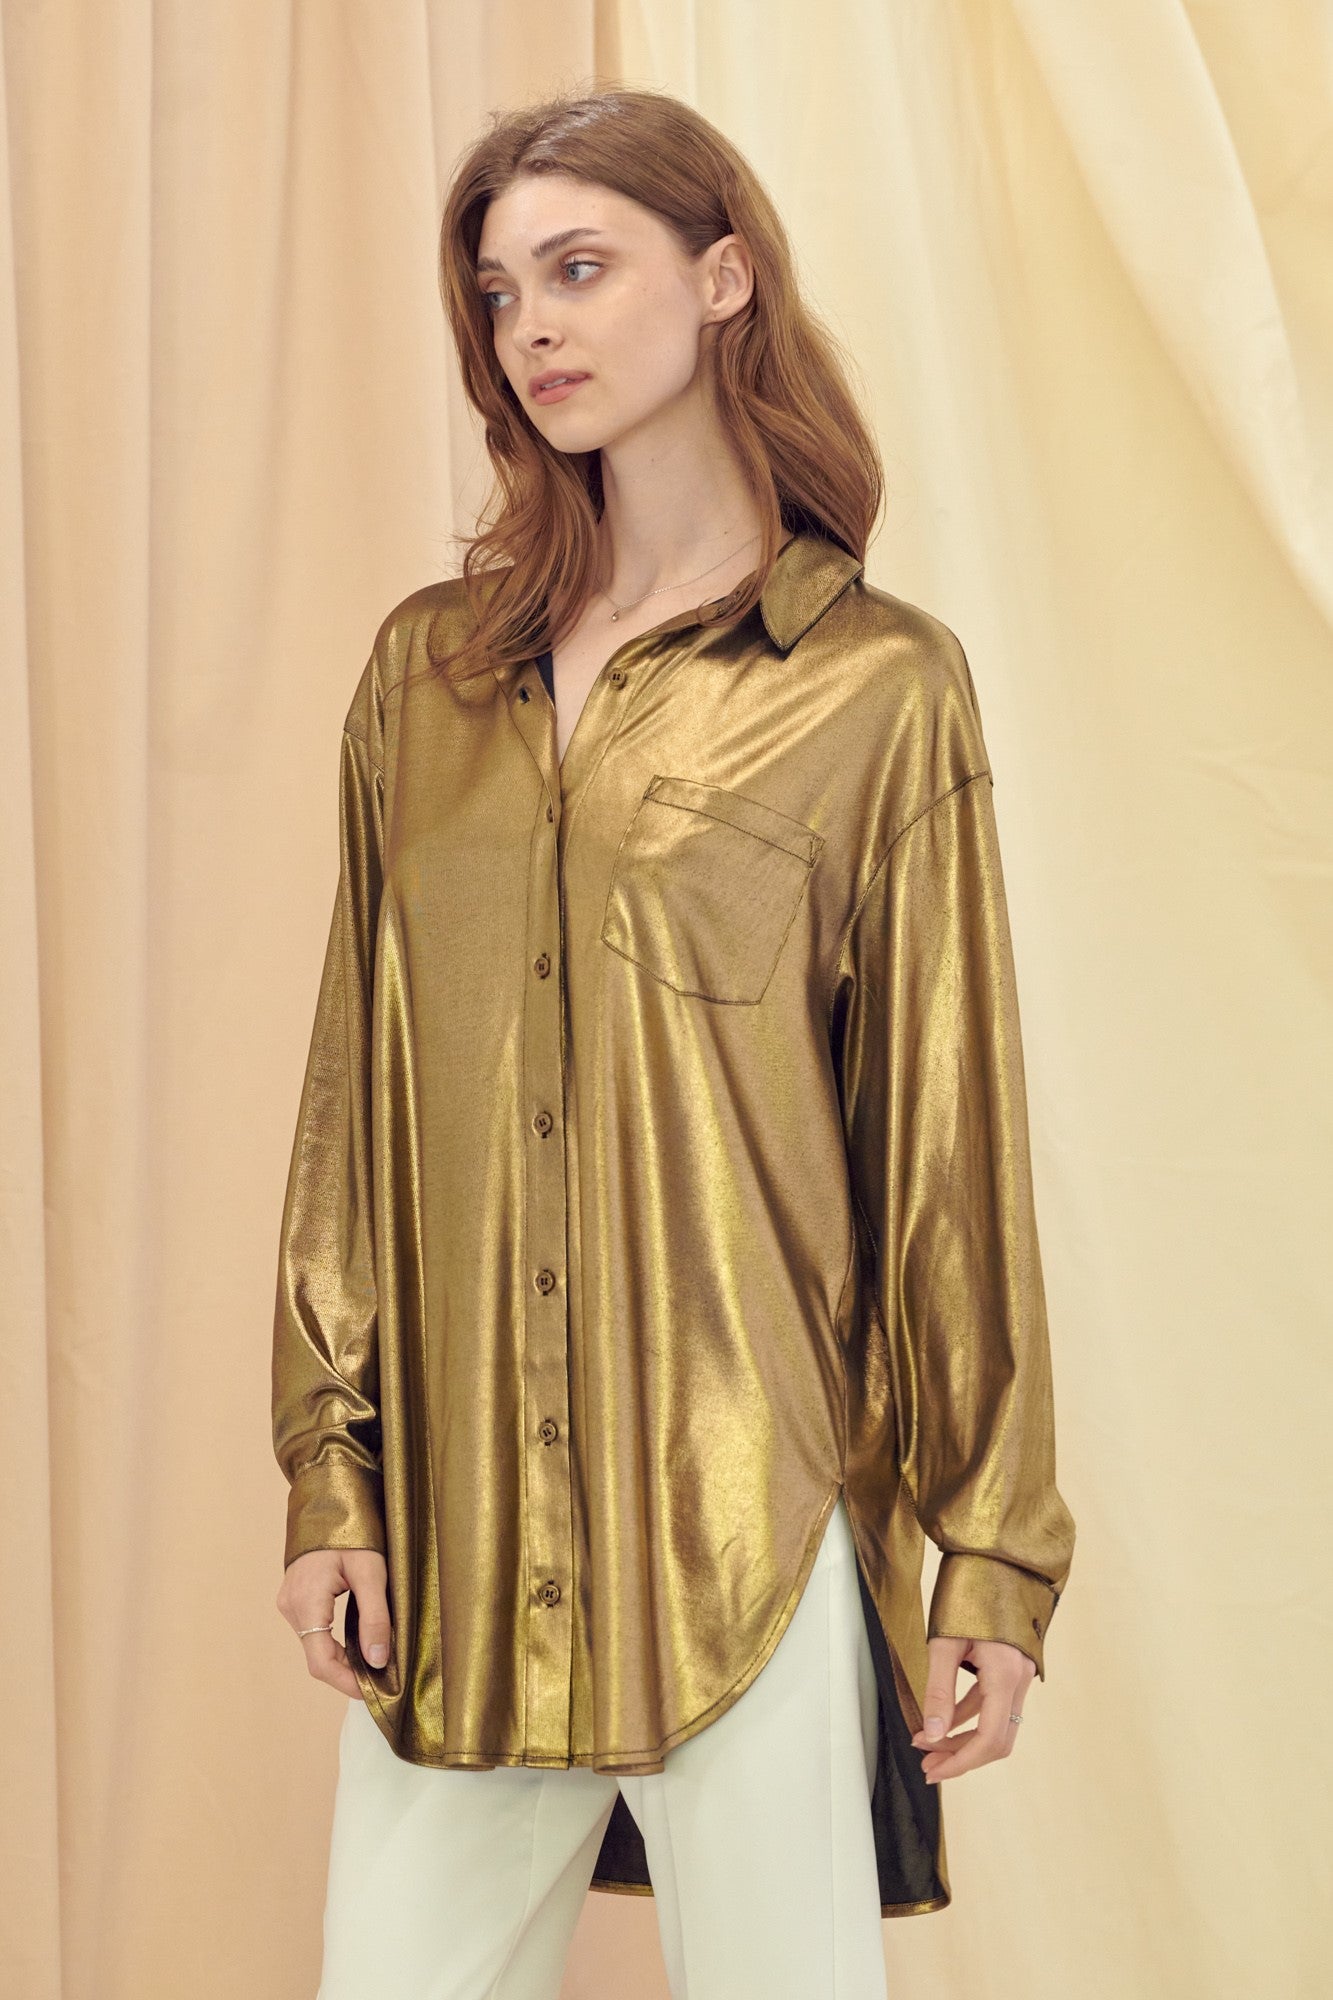 Weezie D. long sleeve Gold Metallic Button Up Stretch Top with front pocket is chic. Wear with denim, pants or even a skirt. We love the stretch metallic fabric for a flowy silhouette. Tuck blouse in or out for a relaxed look. Feels like luxury on your skin. Wear any time of year. Thigh Length 95% Polyester 5% Spandex